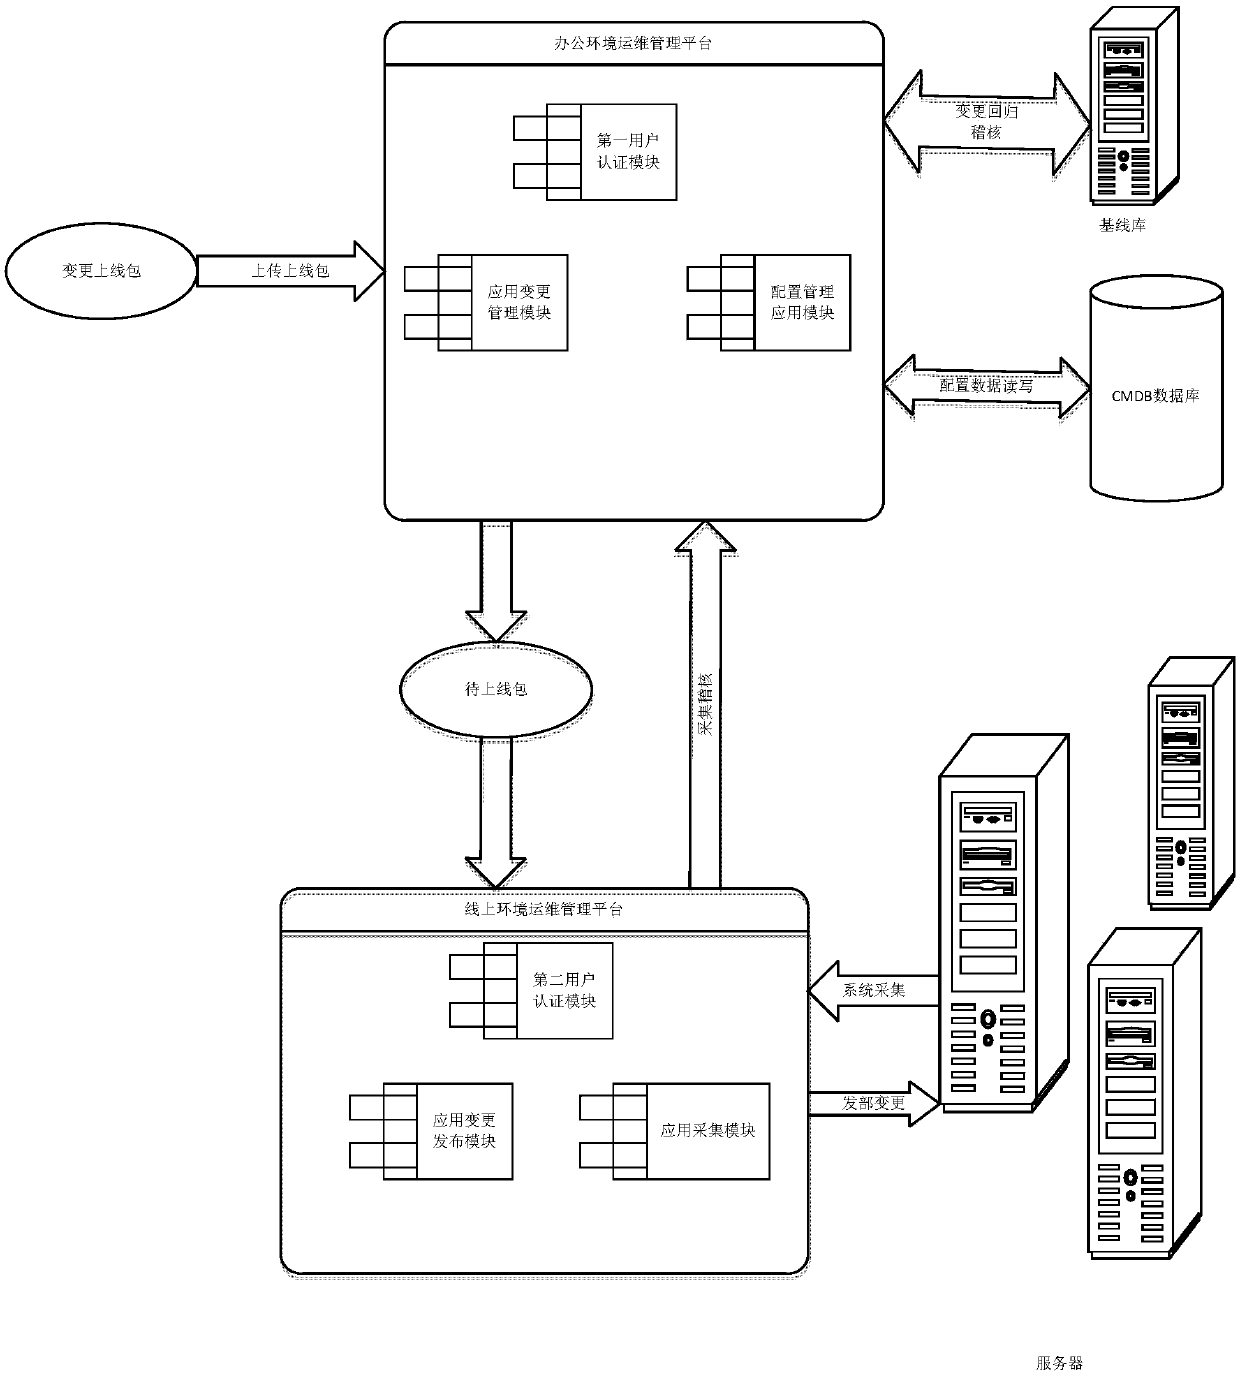 A system for realizing automatic application deployment and influence analysis